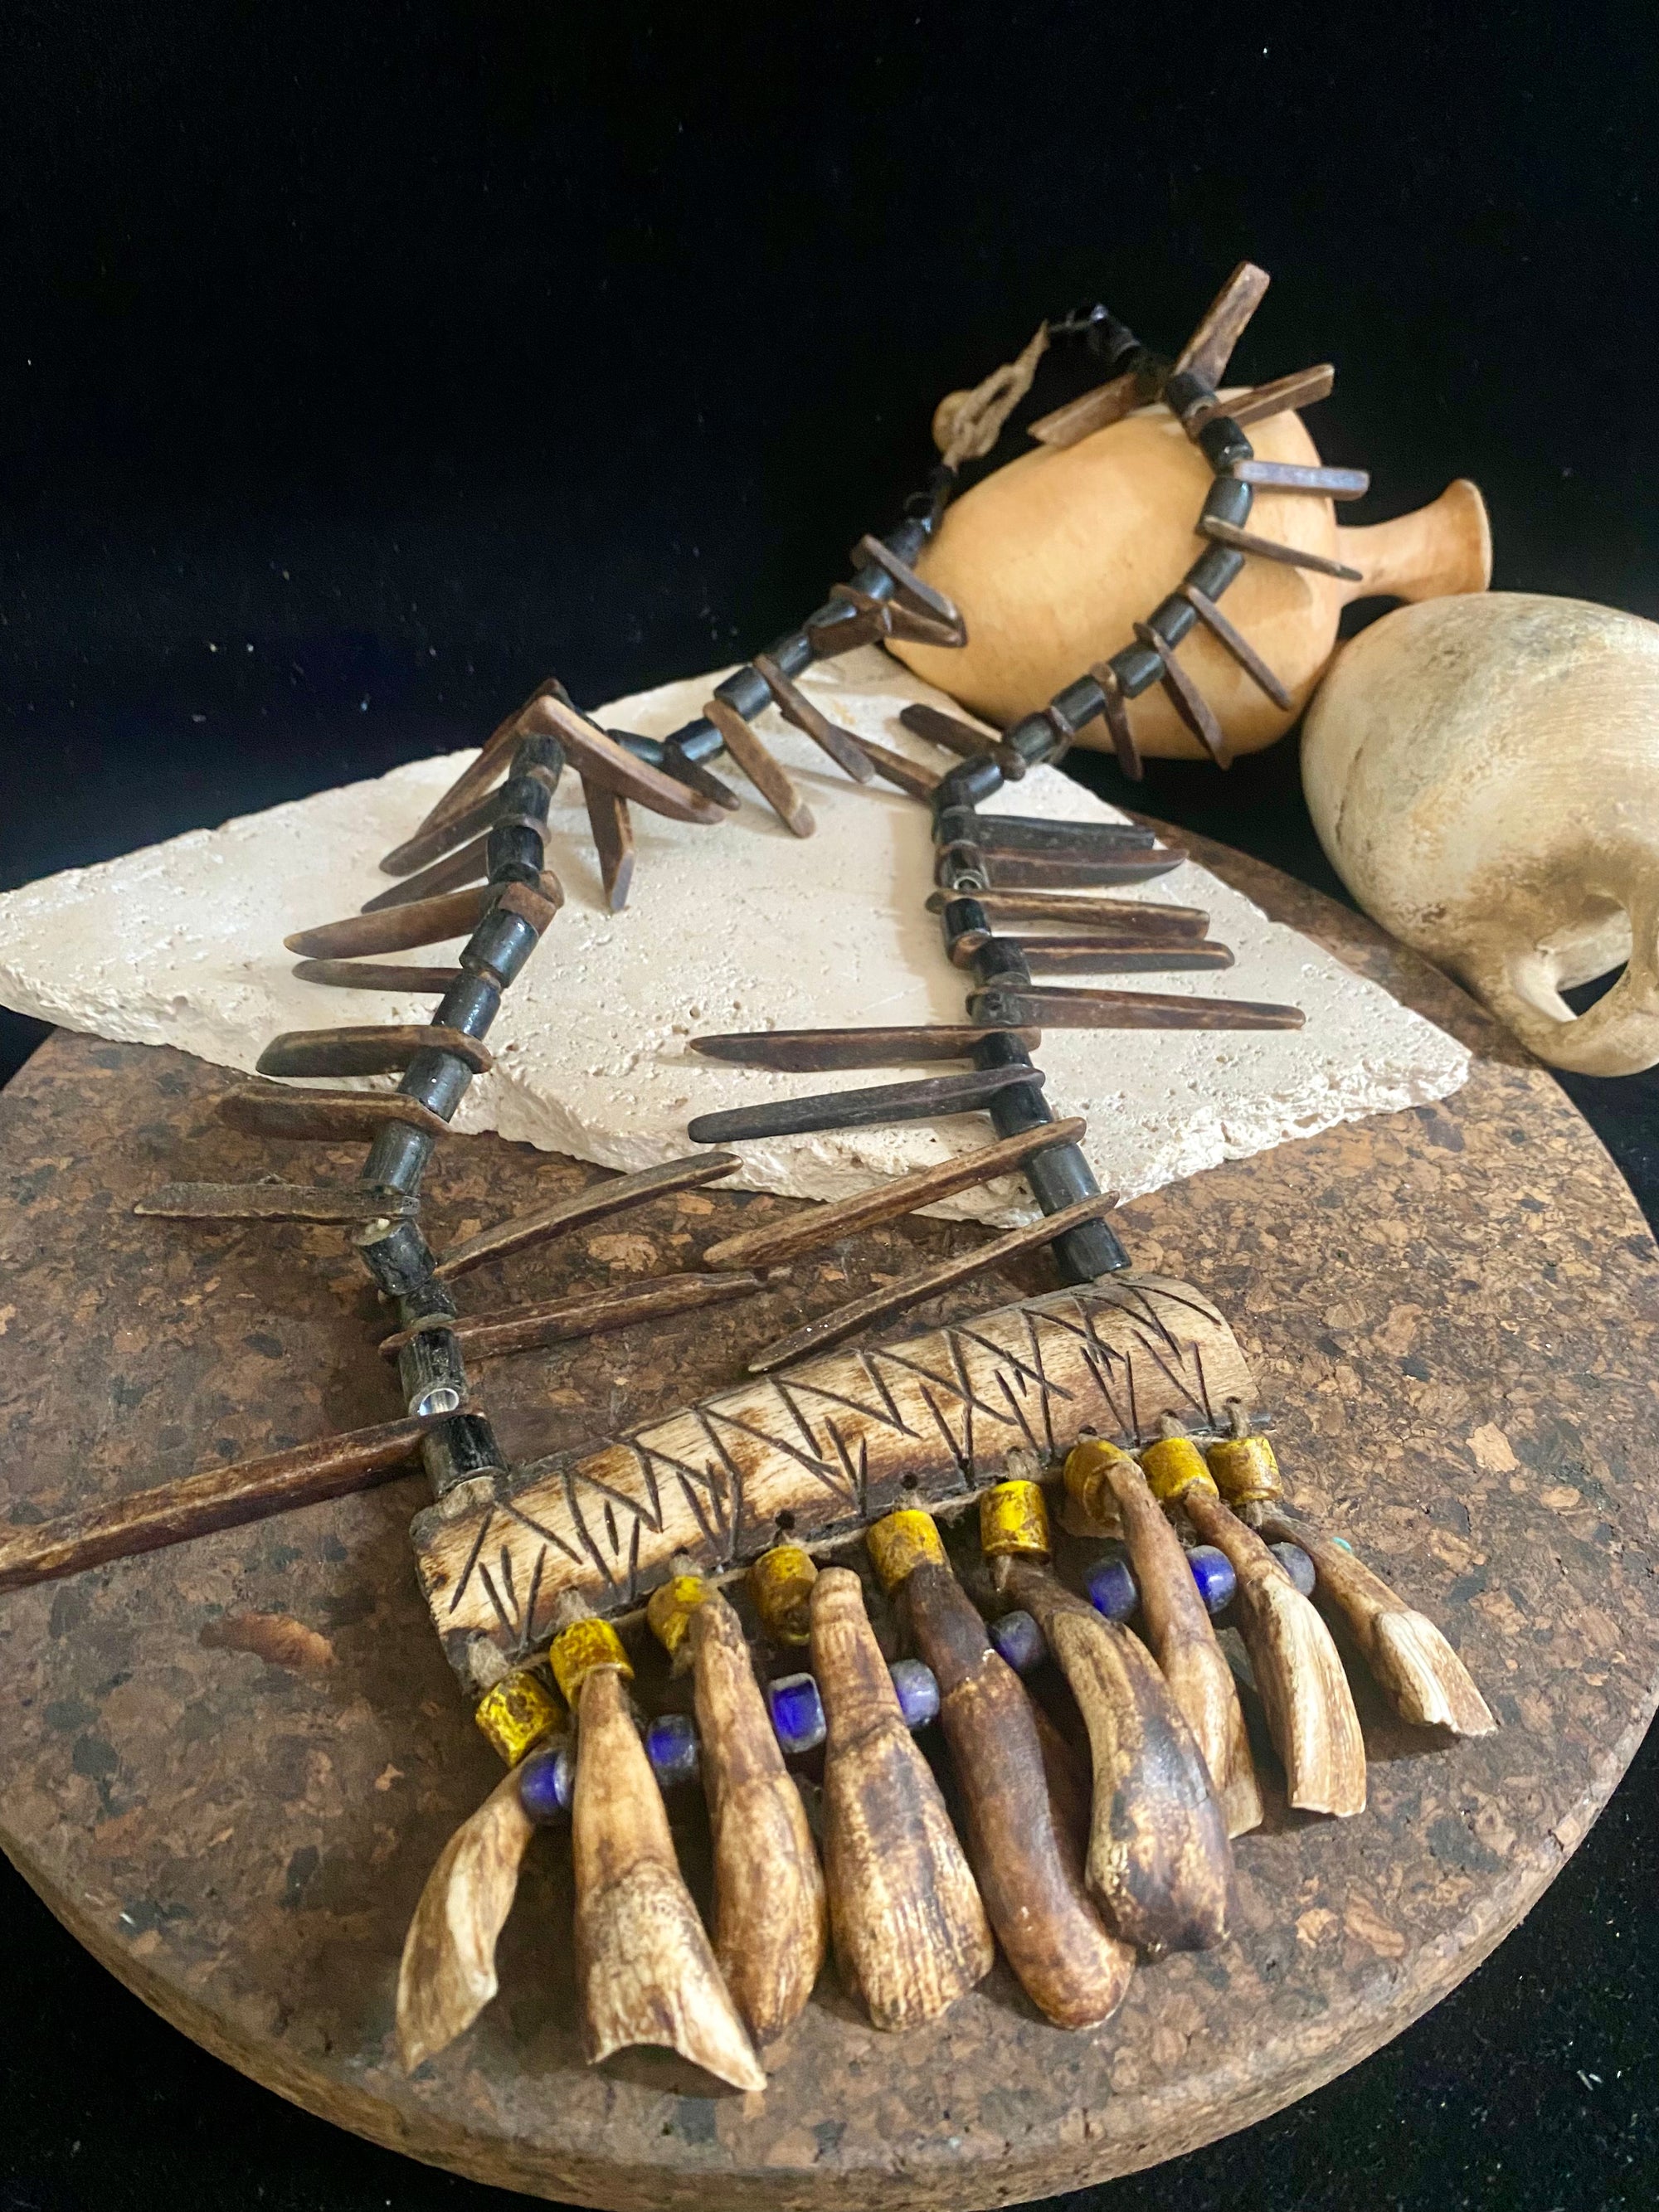 long buffalo tooth and bone necklace. It's made with a combination of buffalo bone, buffalo tooth and ceramic beads. This is a new necklace made in typical Naga tribal style. Length 45 cm